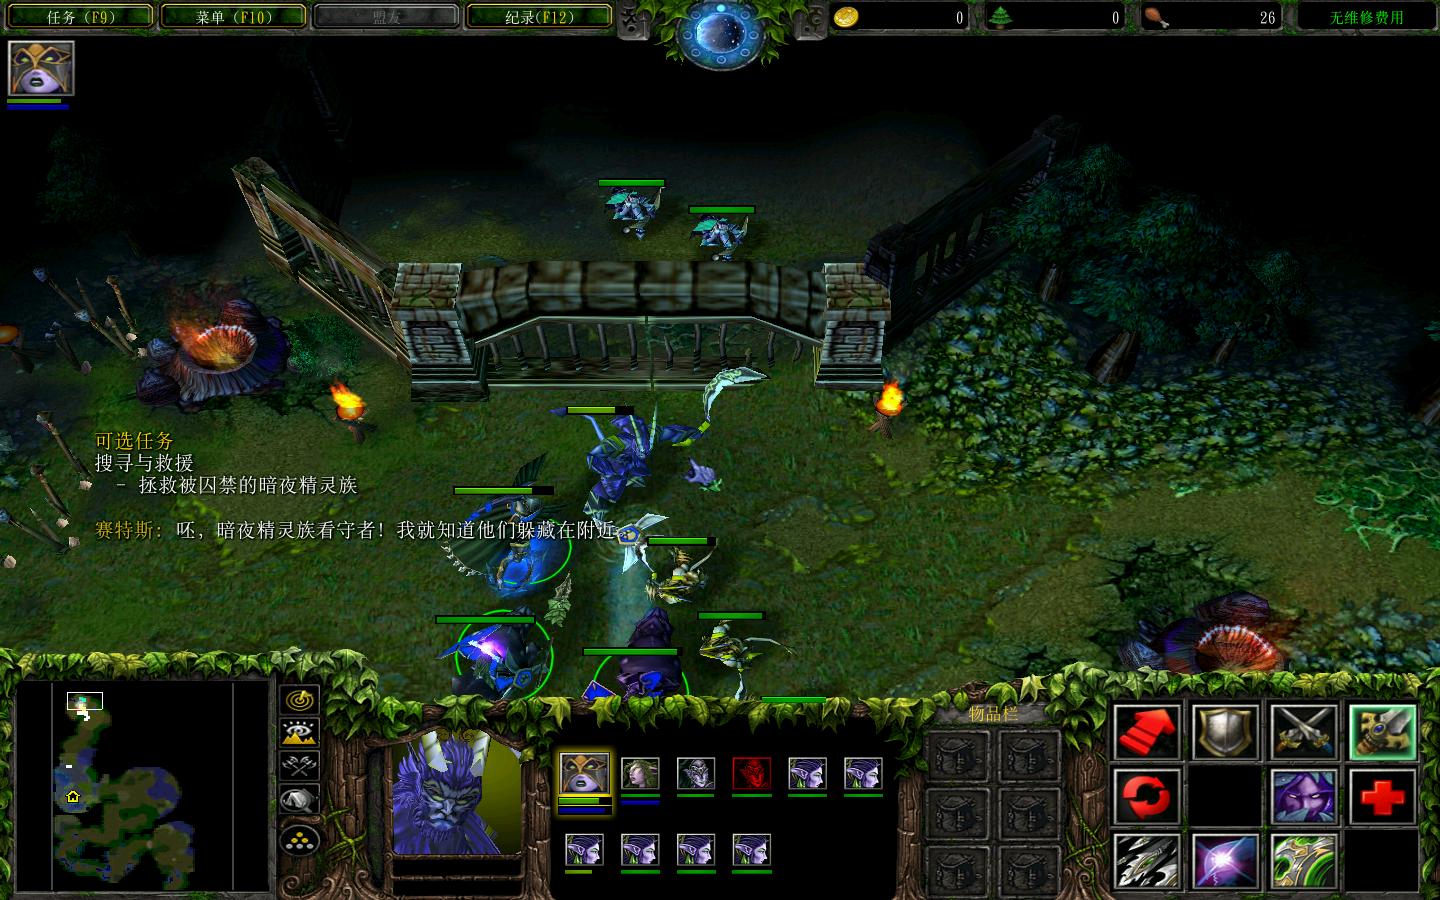 ħ3Warcraft III The Frozen Thronev1.24˹ʹv22.3ʽ